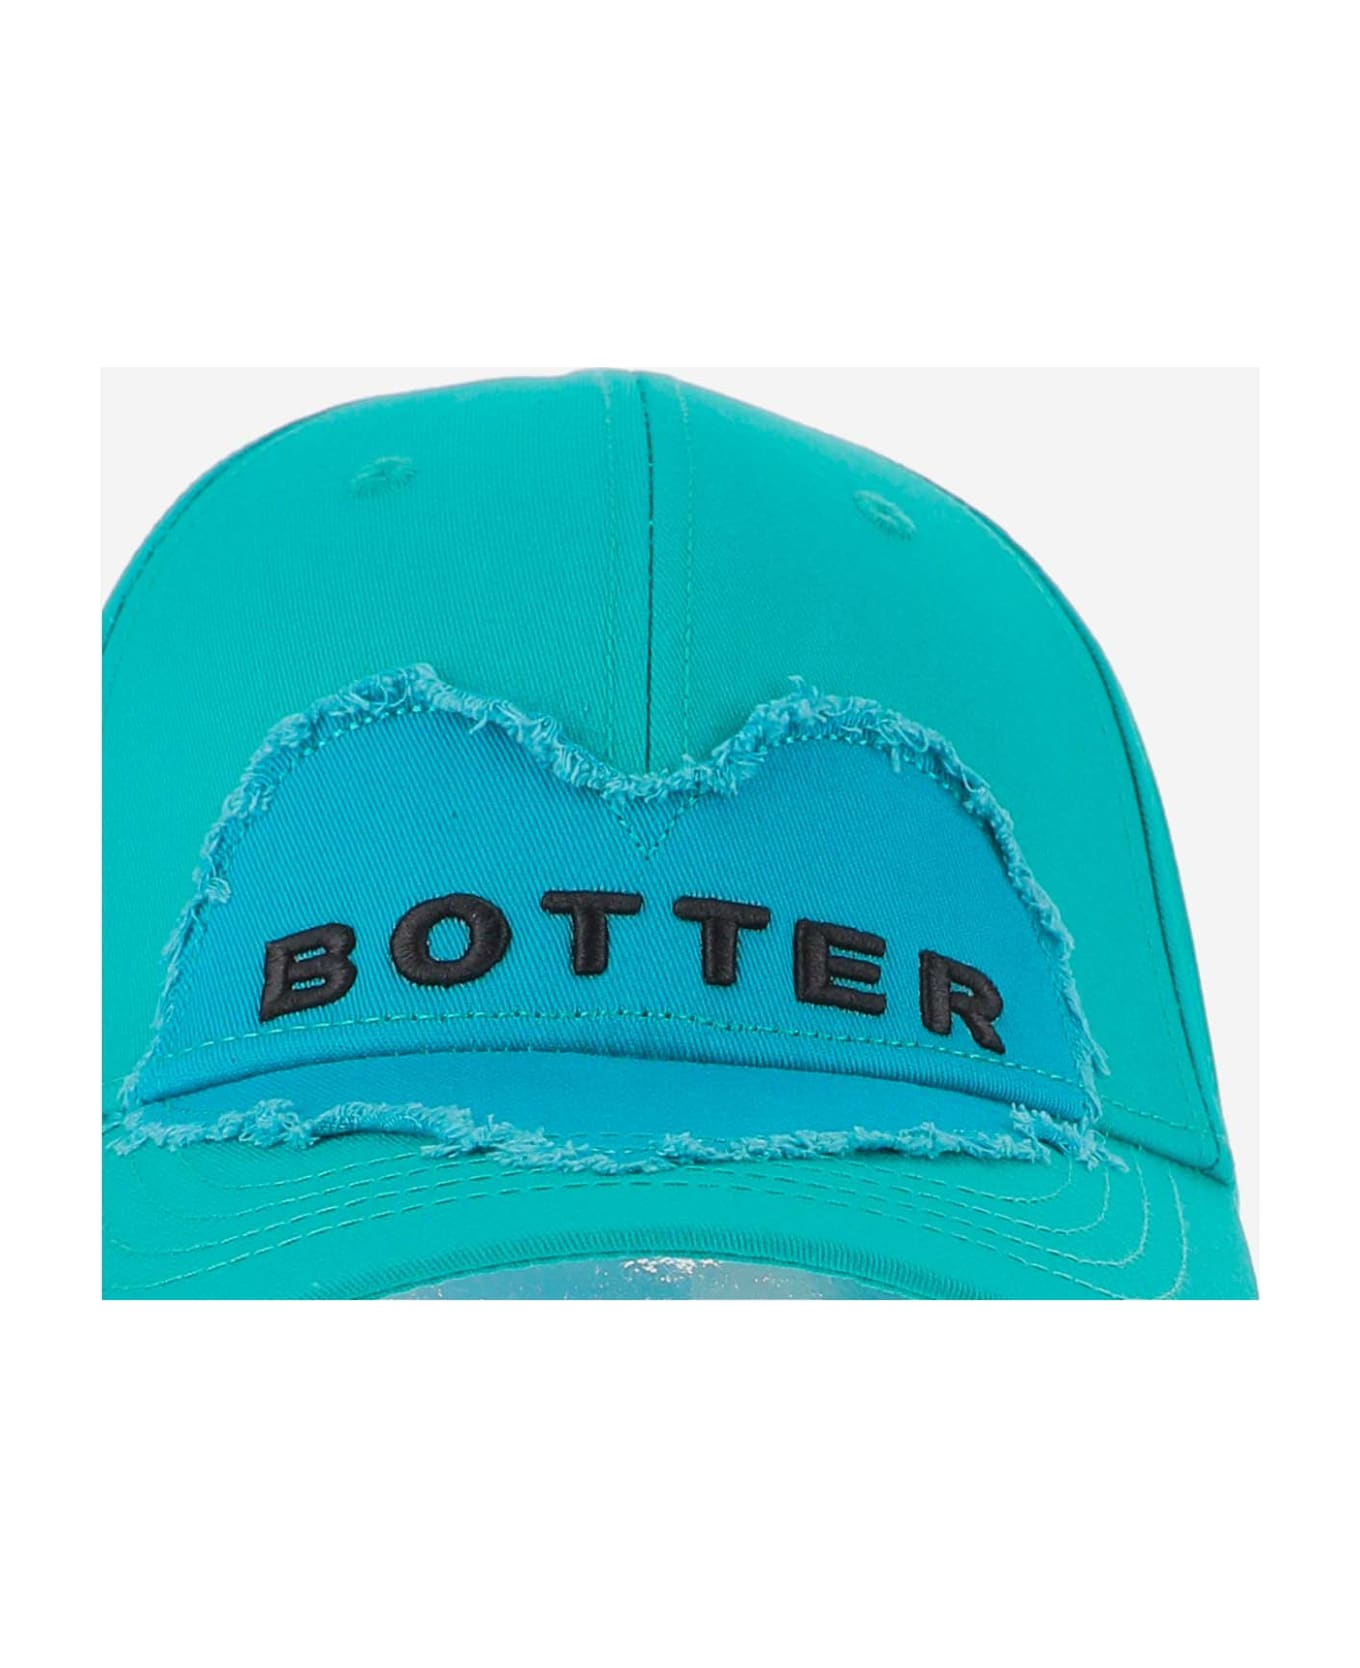 Botter Baseball Cap With Embroidered Logo - Red 帽子